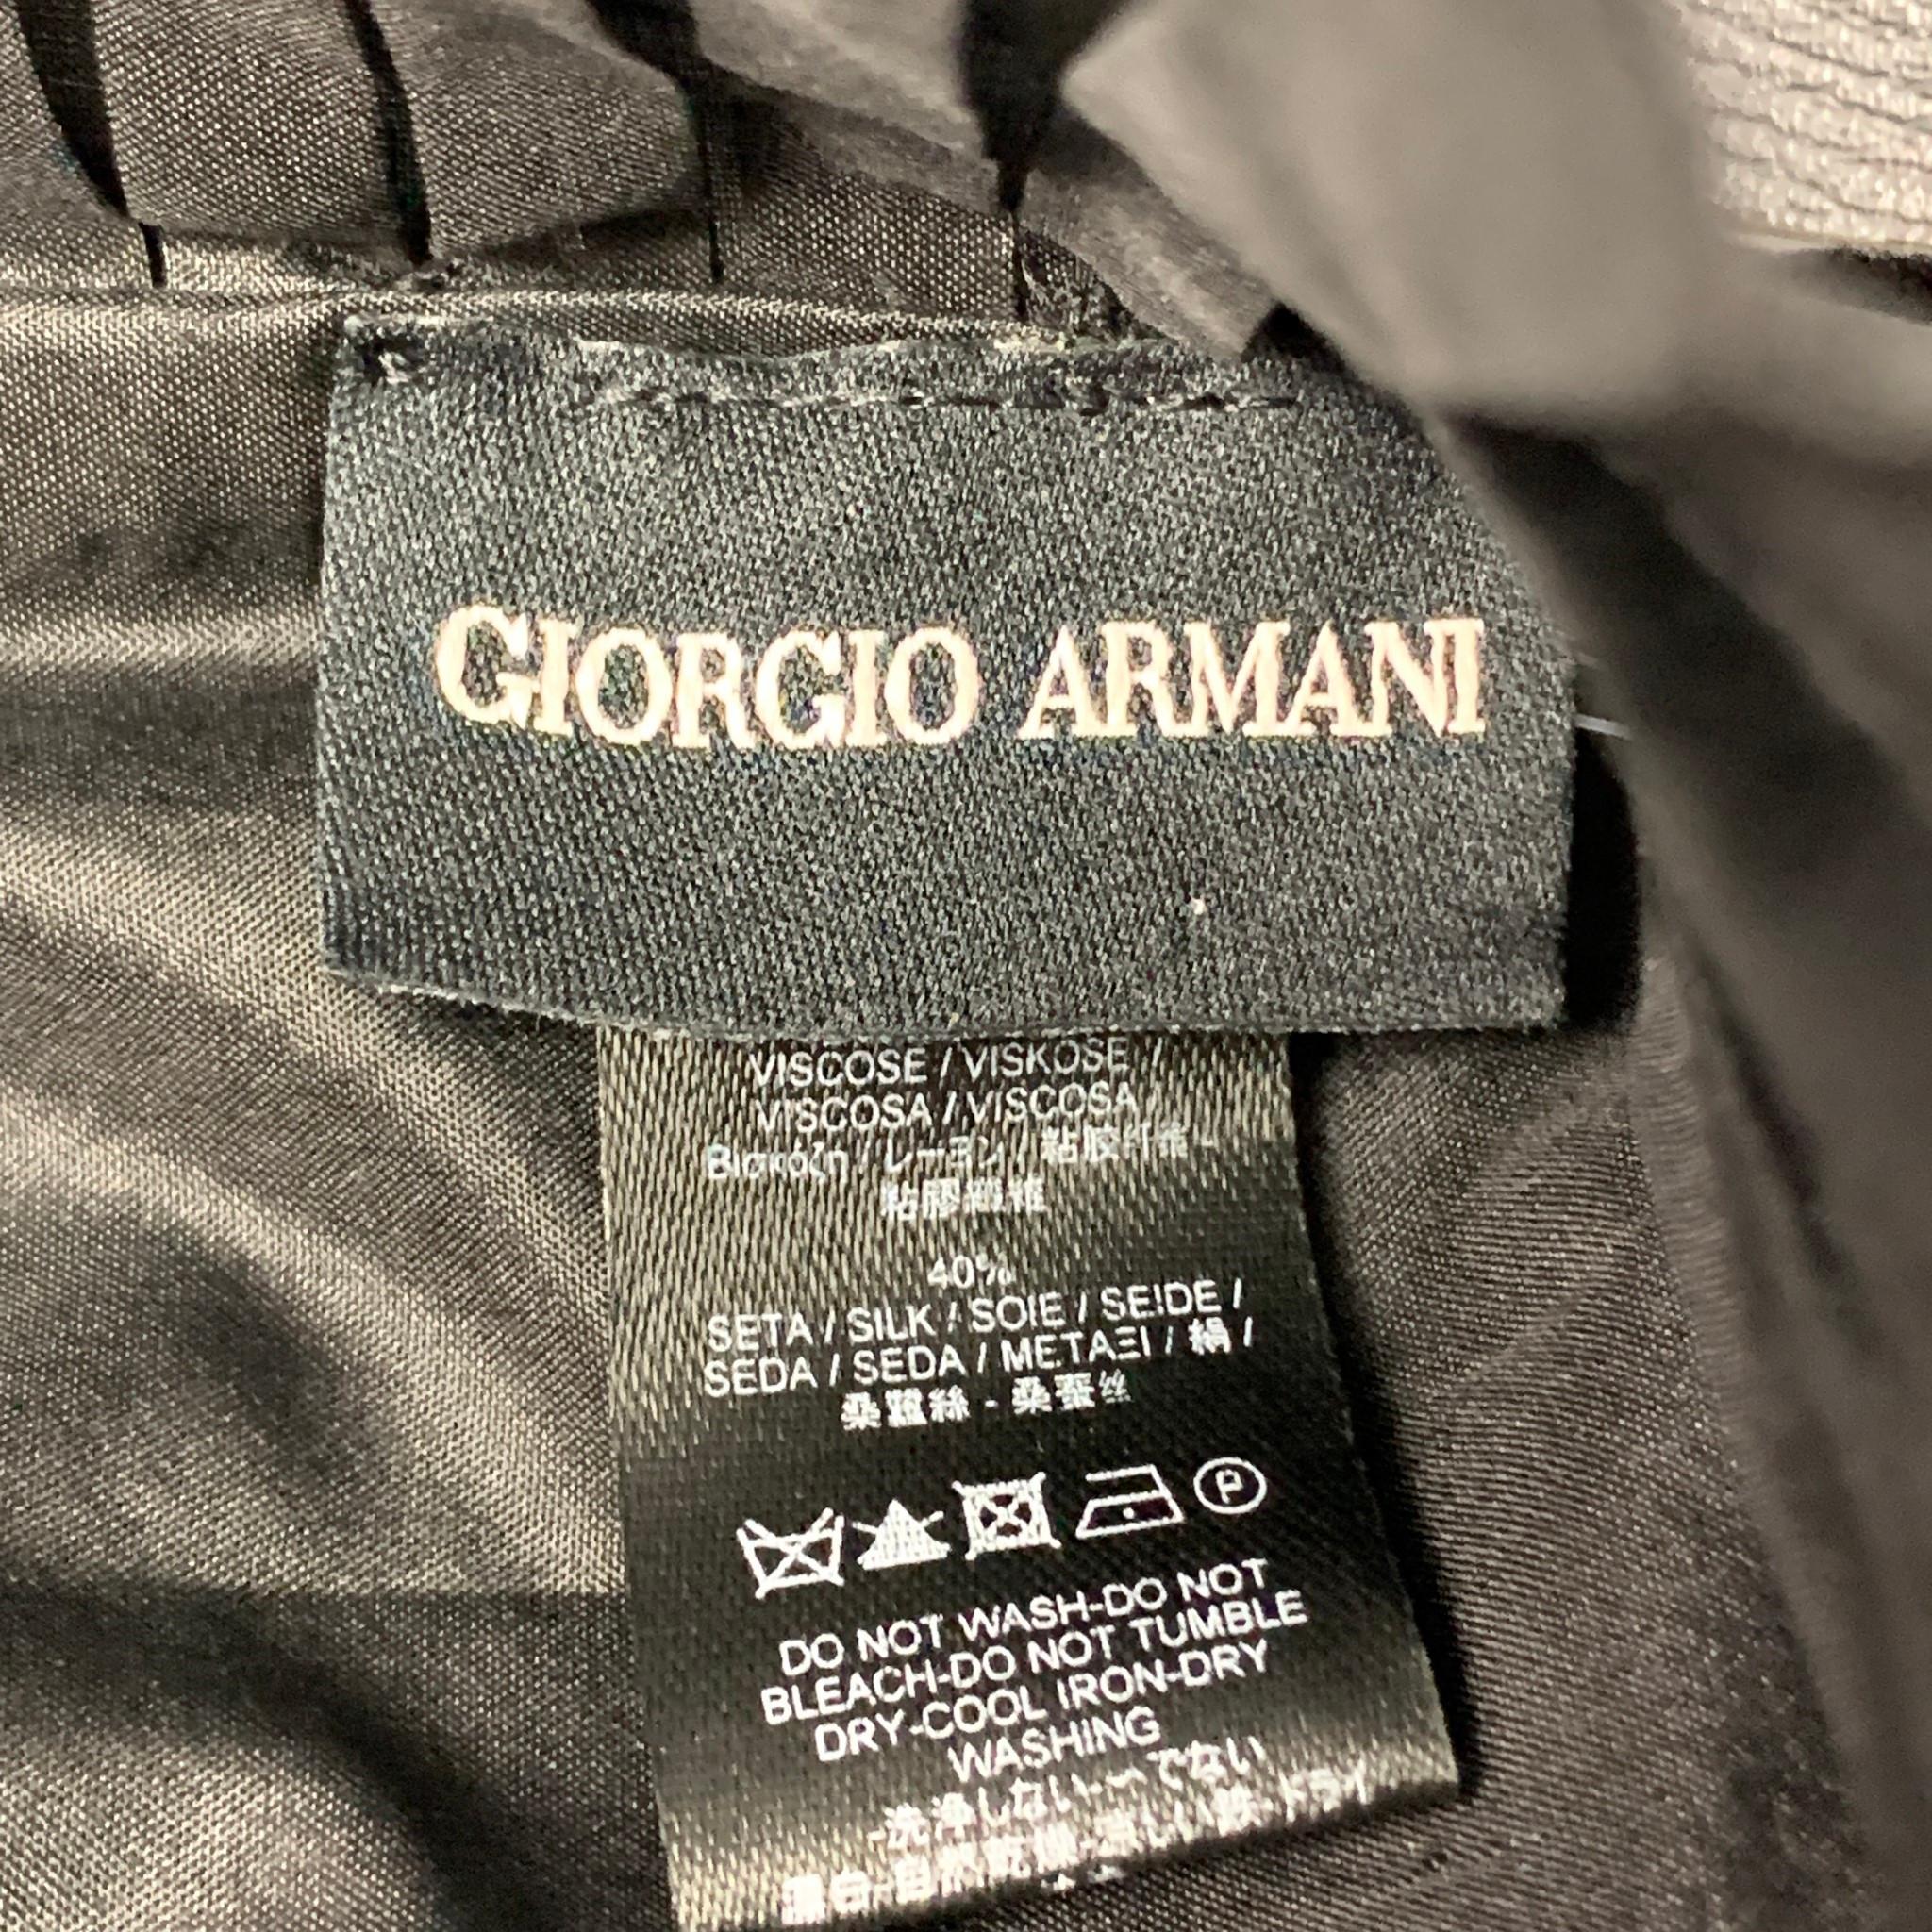 GIORGIO ARMANI jacket comes in a black viscose velvet featuring a cape style, ruffle hem, and a open front. Made in Italy. 

Very Good Pre-Owned Condition.
Marked: One size

Measurements:

Sleeve: 15 in.
Length: 17.5 in. 